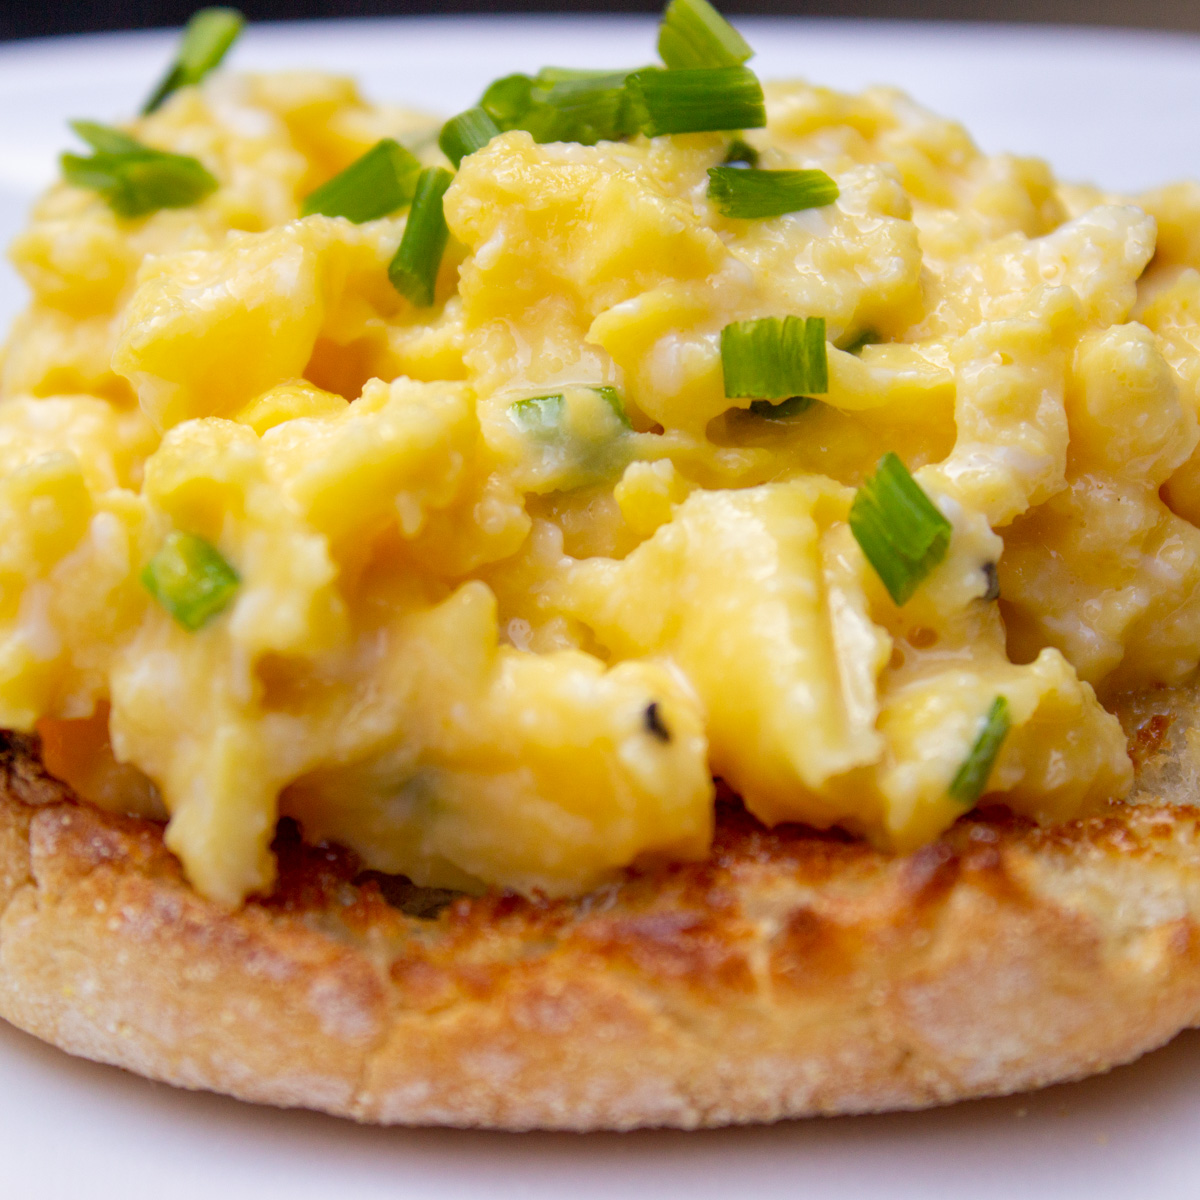 scrambled eggs on english muffin on plate